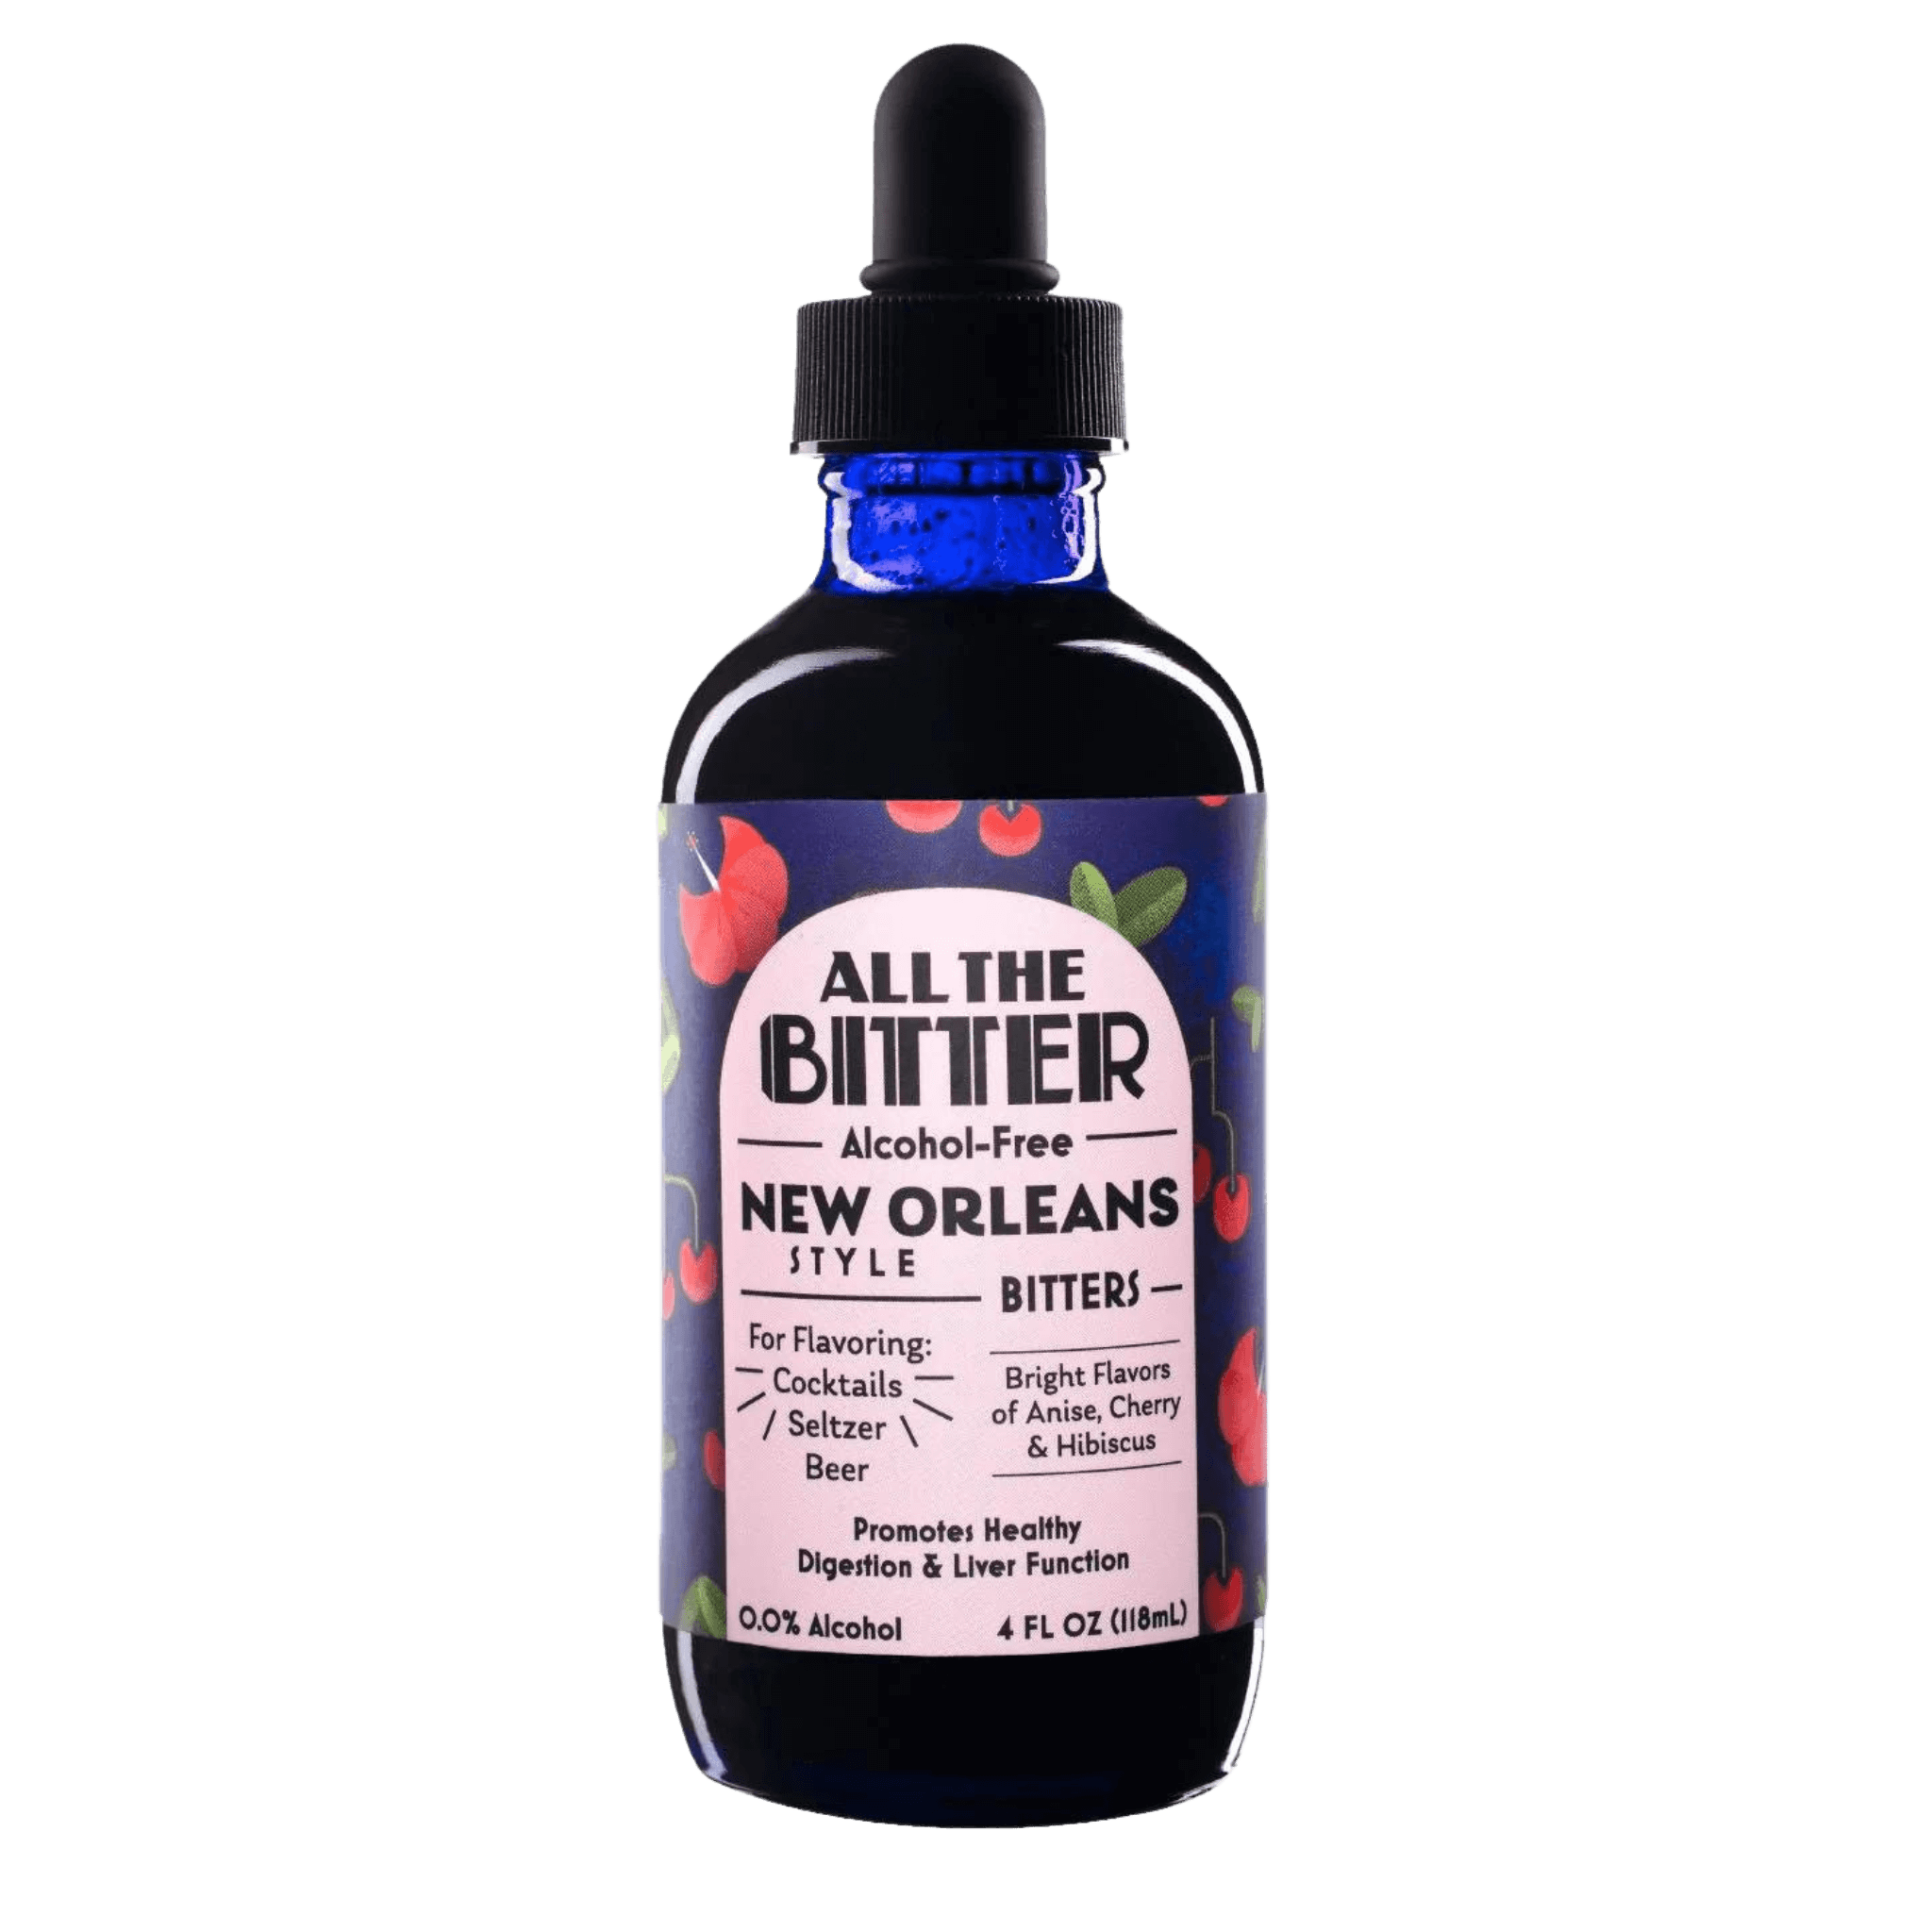 All The Bitter New Orleans Alcohol-Free Bitters Front